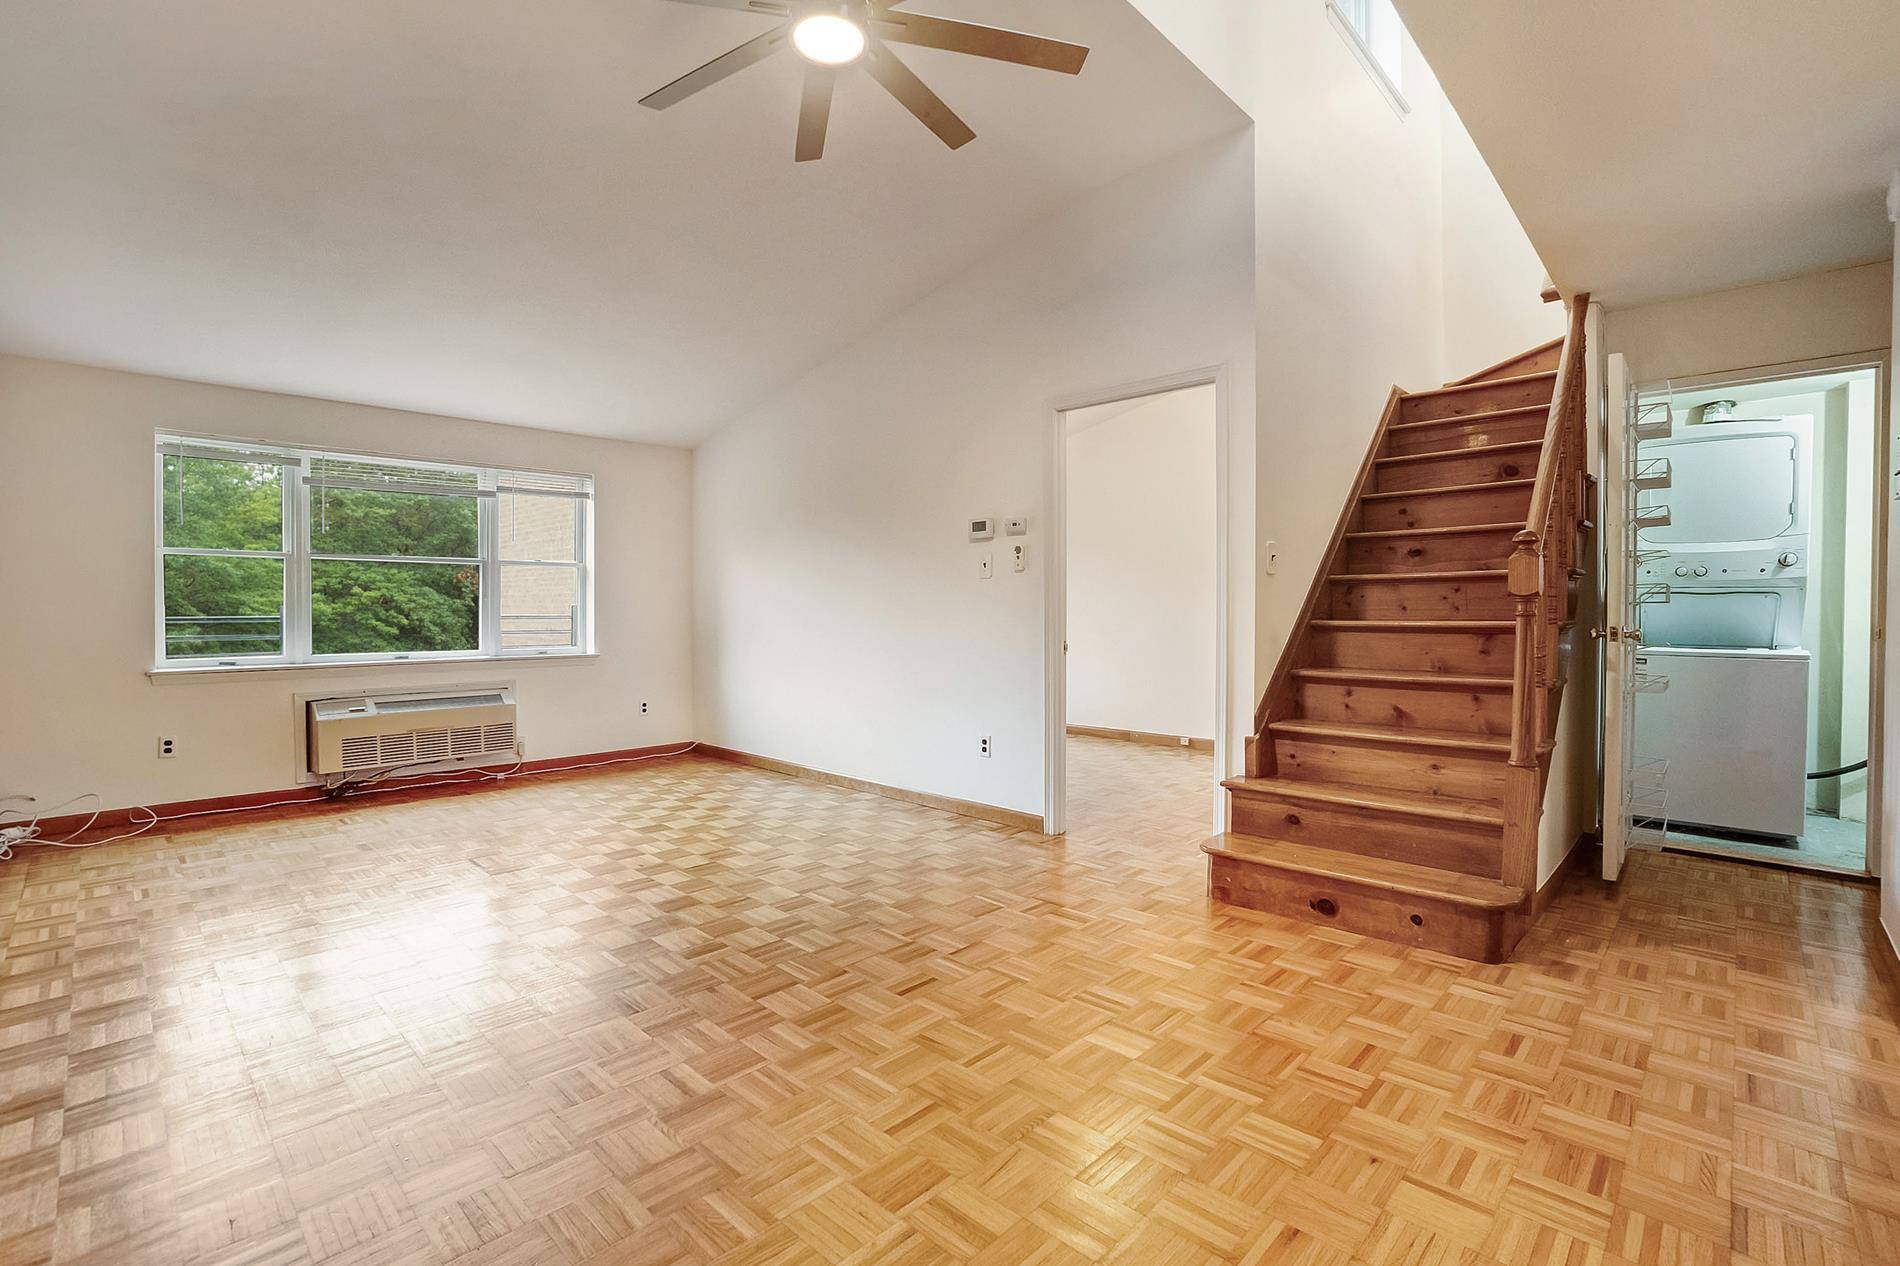 NO FEE for 2 year lease. Prospect Park is your backyard !